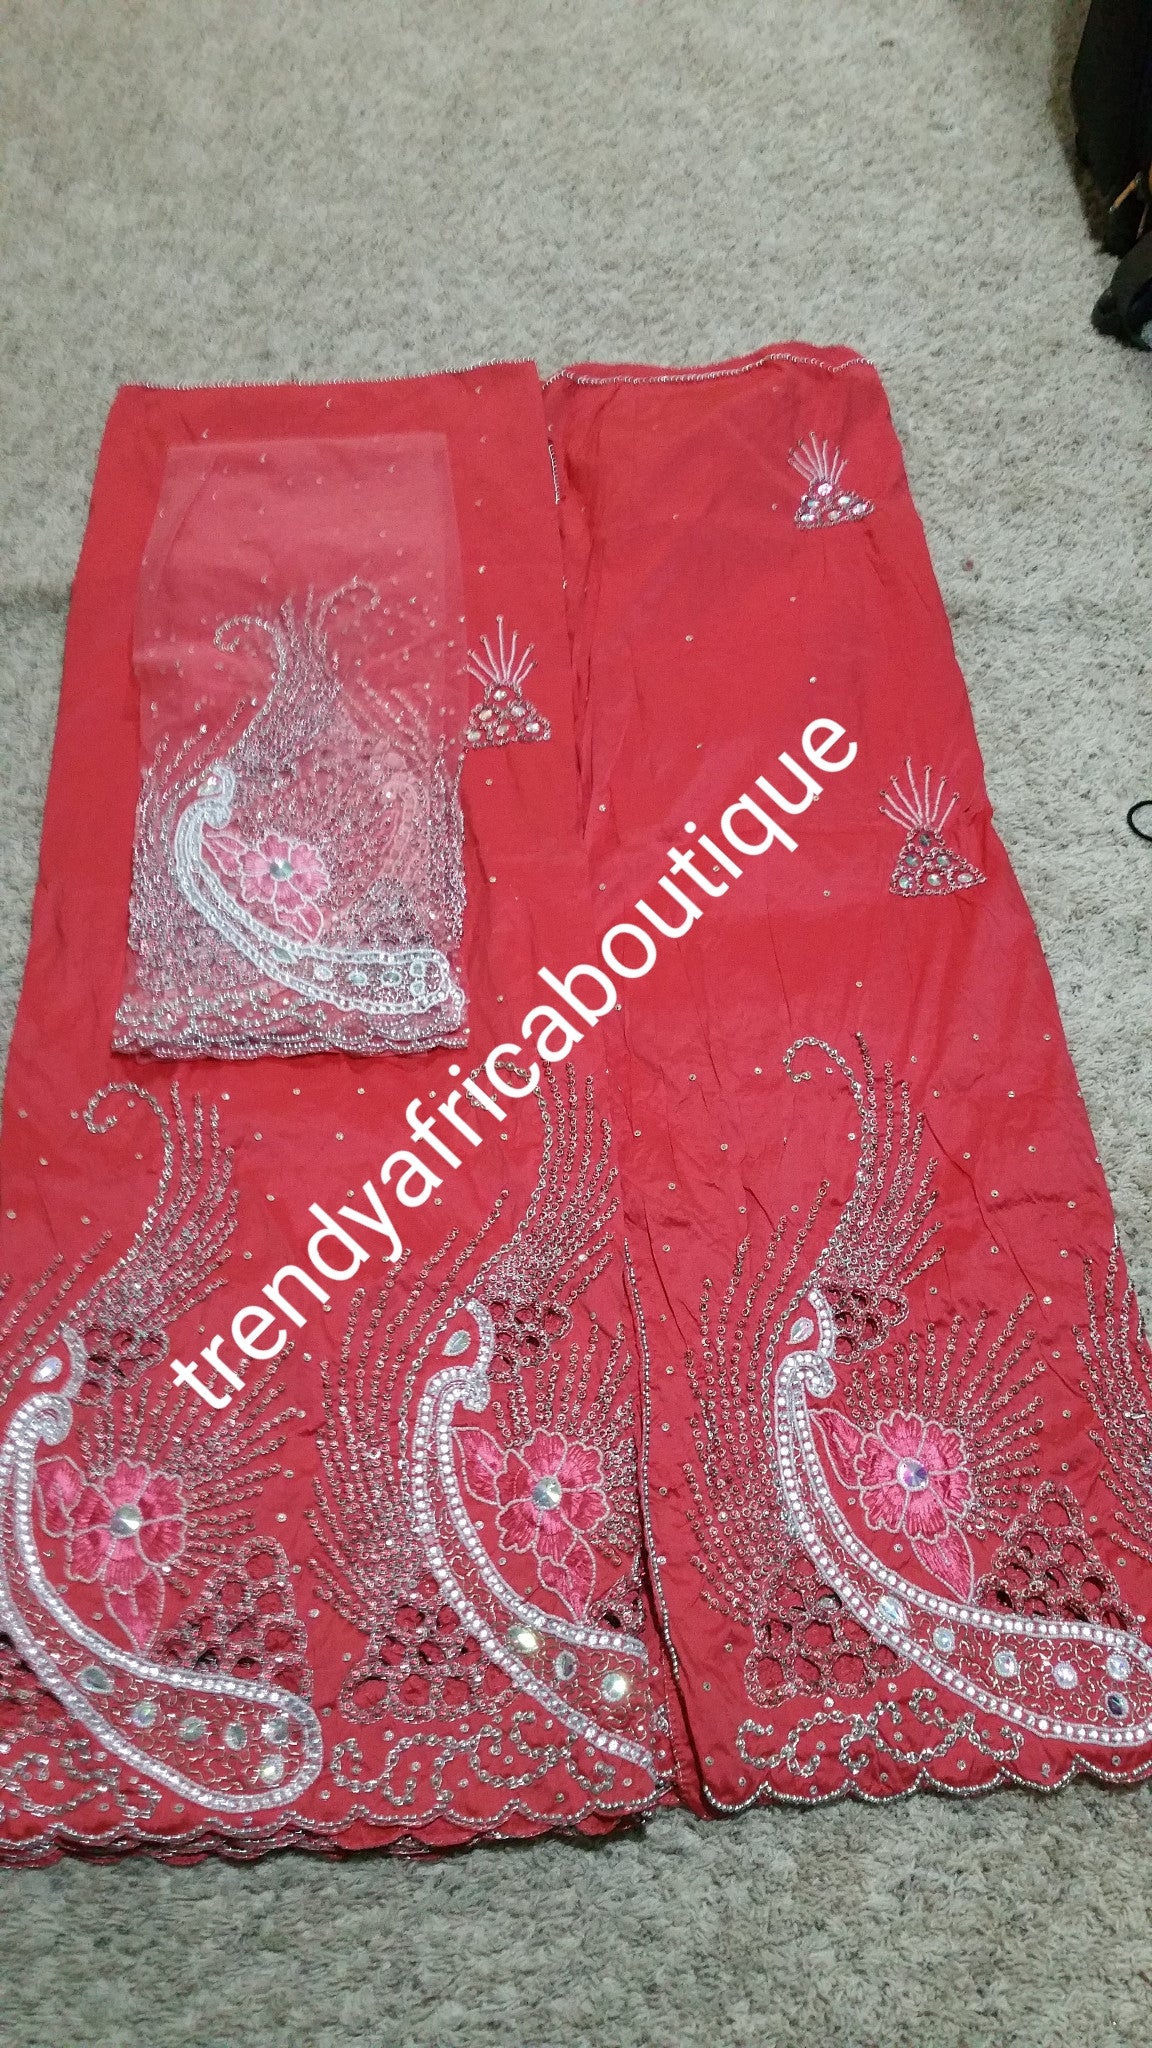 Clearance Sale: sweet Coral Nigerian  Hand Stoned George Wrapper with matching blouse. Coral color. Sold as a set of 5yds + 1.8yds matching blouse